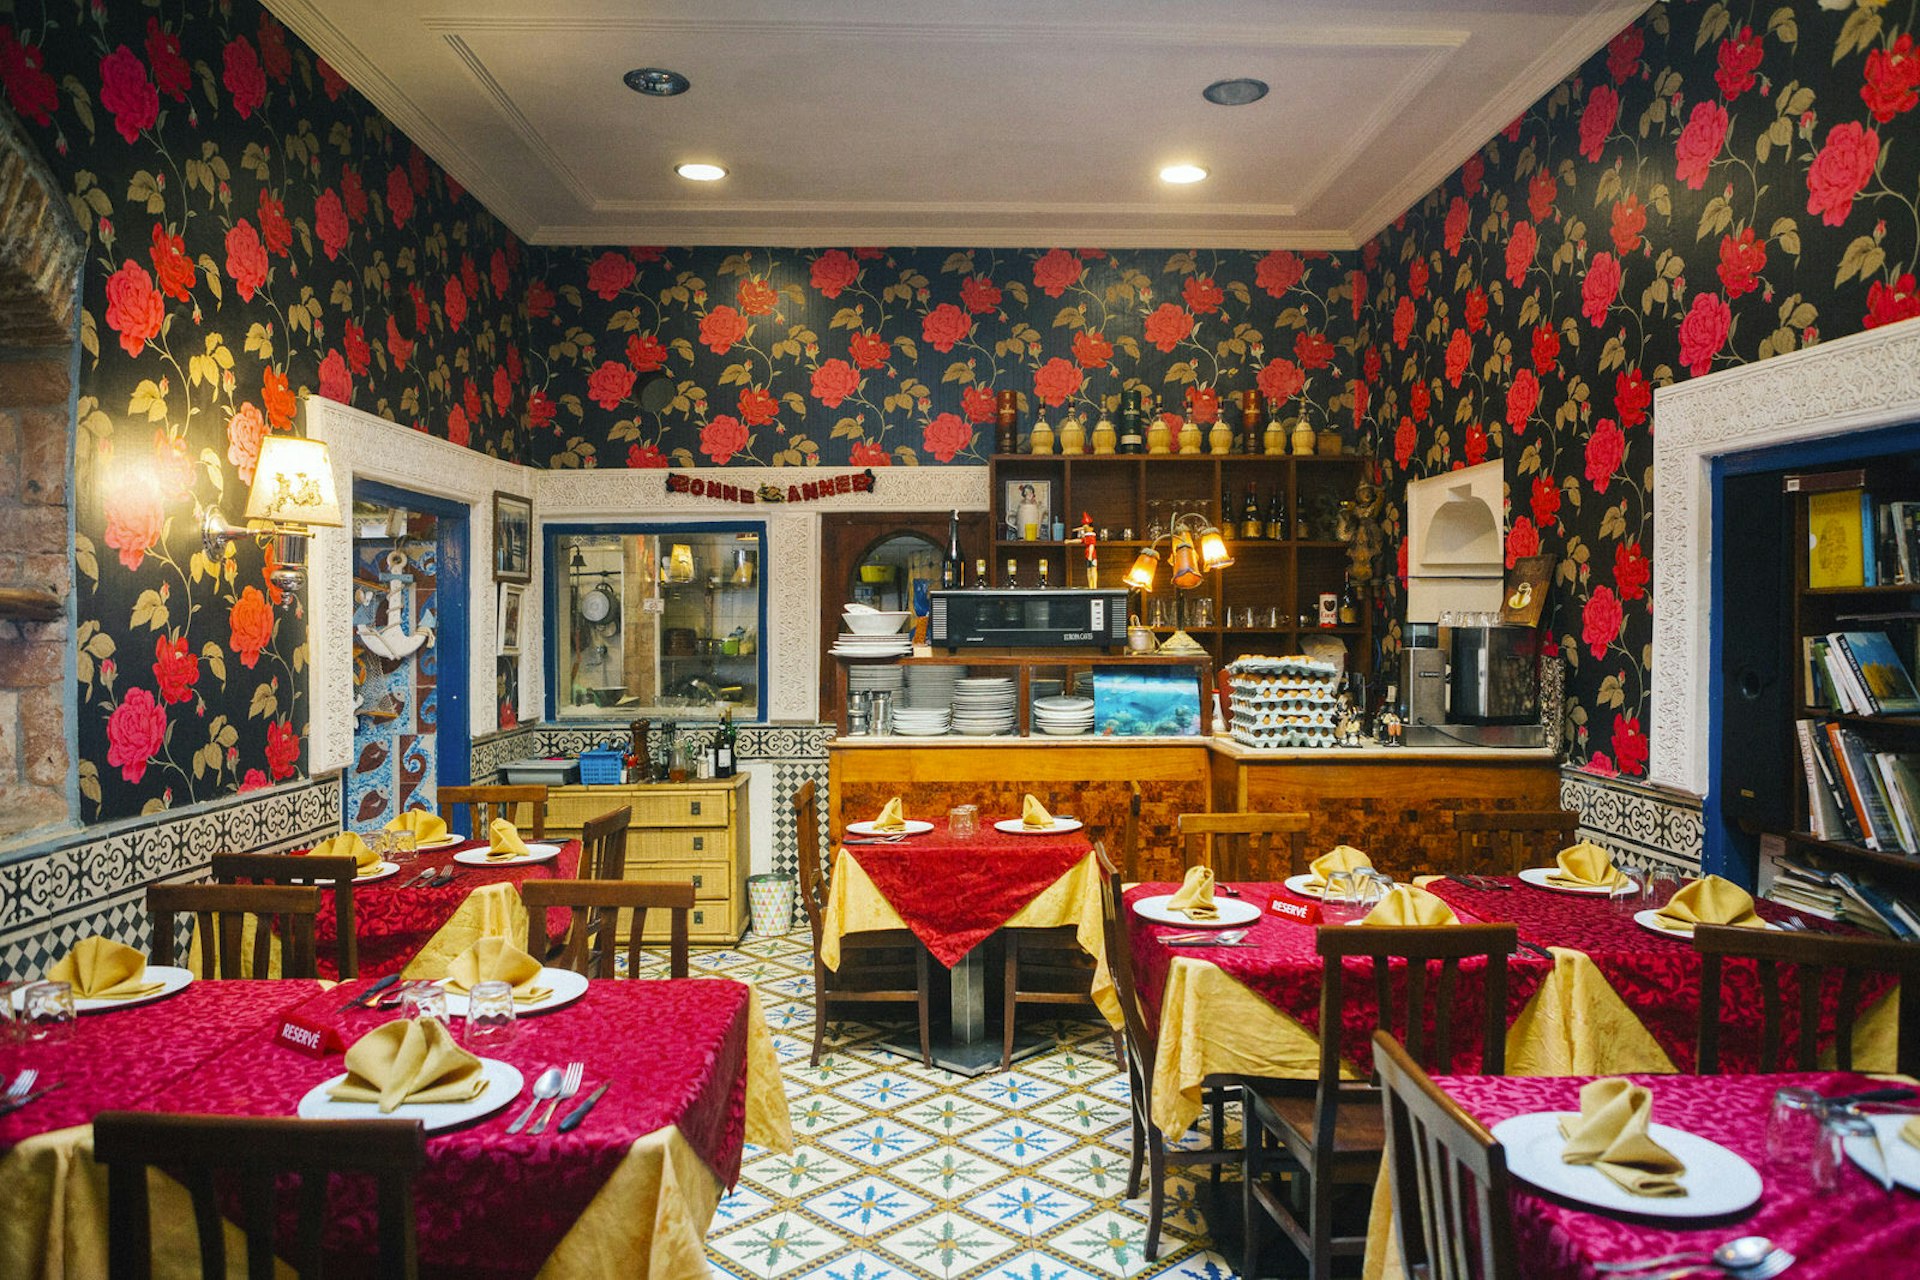 Dining room at Silvestro, Essaouira, Morocco © Chris Griffiths / Lonely Planet